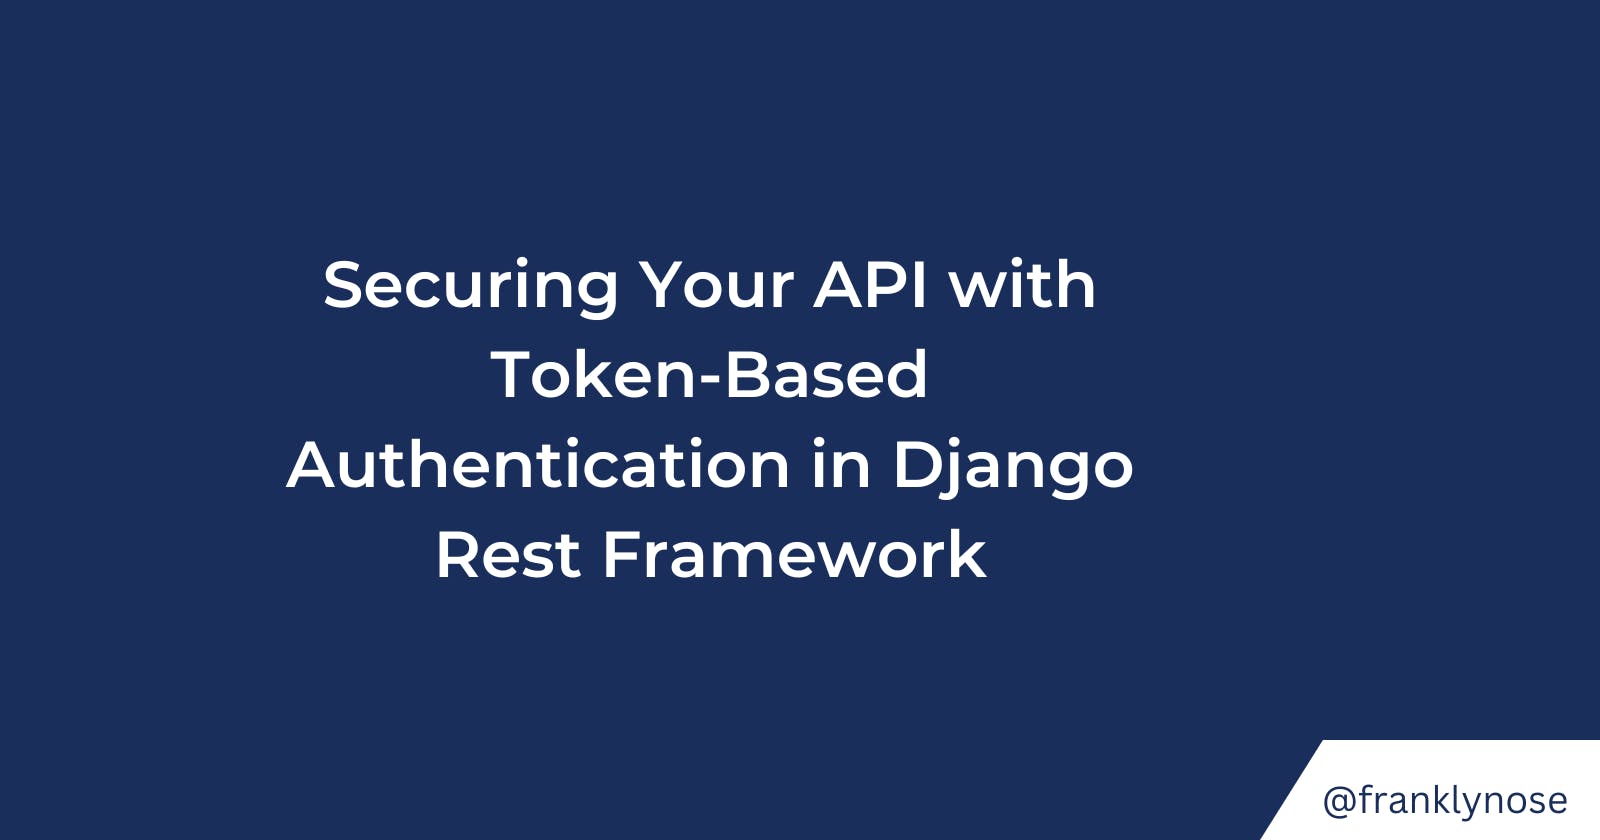 Securing Your API with Token-Based Authentication in Django Rest Framework